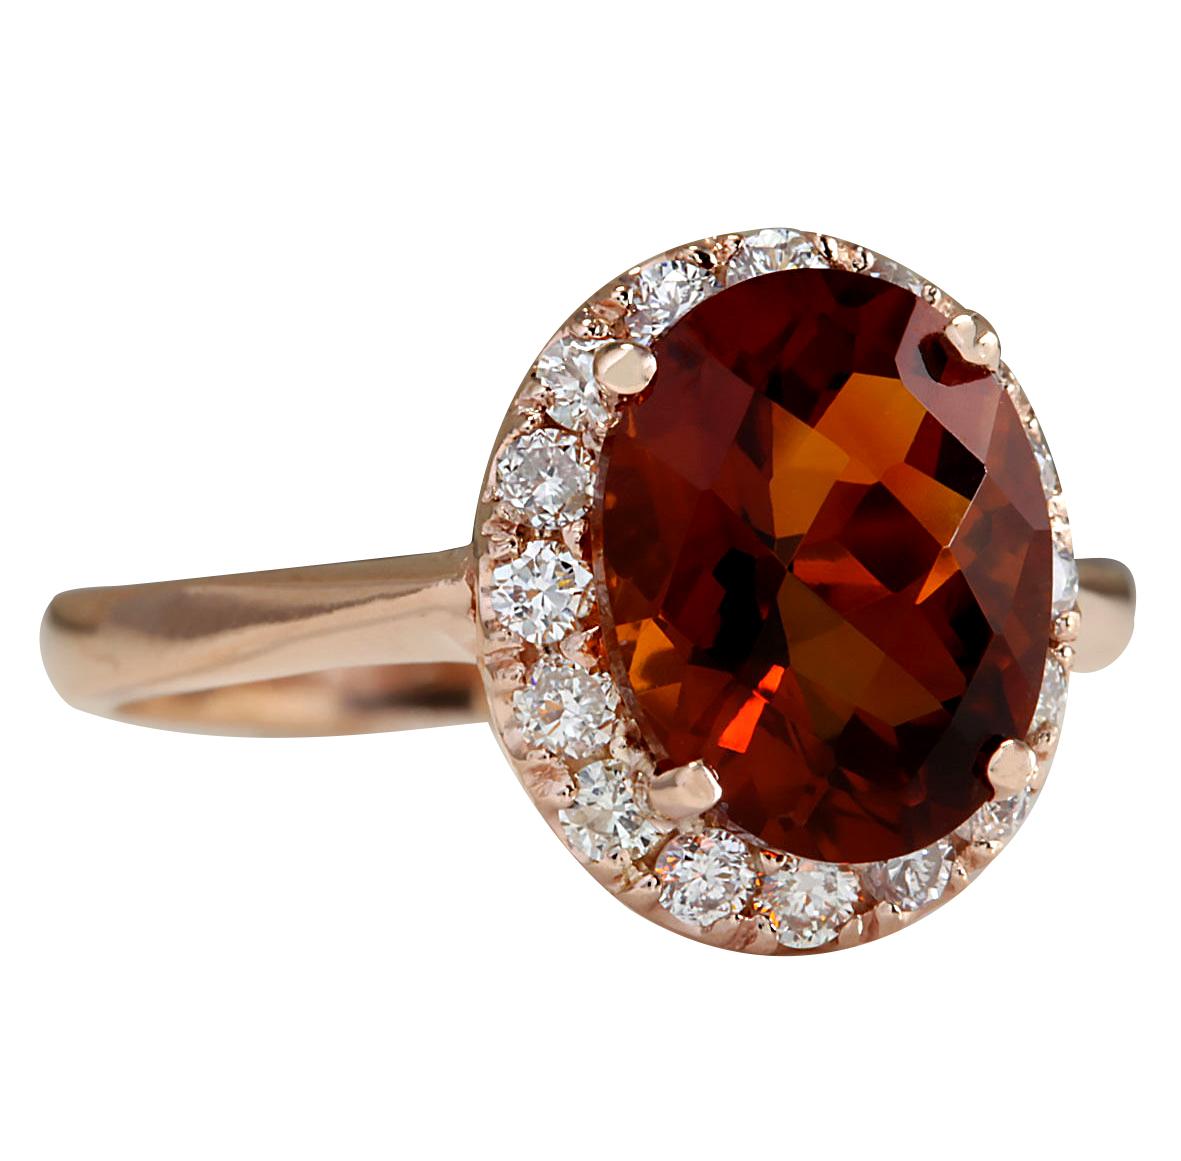 Stamped: 14K Rose Gold
Total Ring Weight: 3.5 Grams
Total Natural Citrine Weight is 2.39 Carat (Measures: 10.00x8.00 mm)
Color: Orange
Total Natural Diamond Weight is 0.43 Carat
Color: F-G, Clarity: VS2-SI1
Face Measures: 12.25x10.65 mm
Sku: